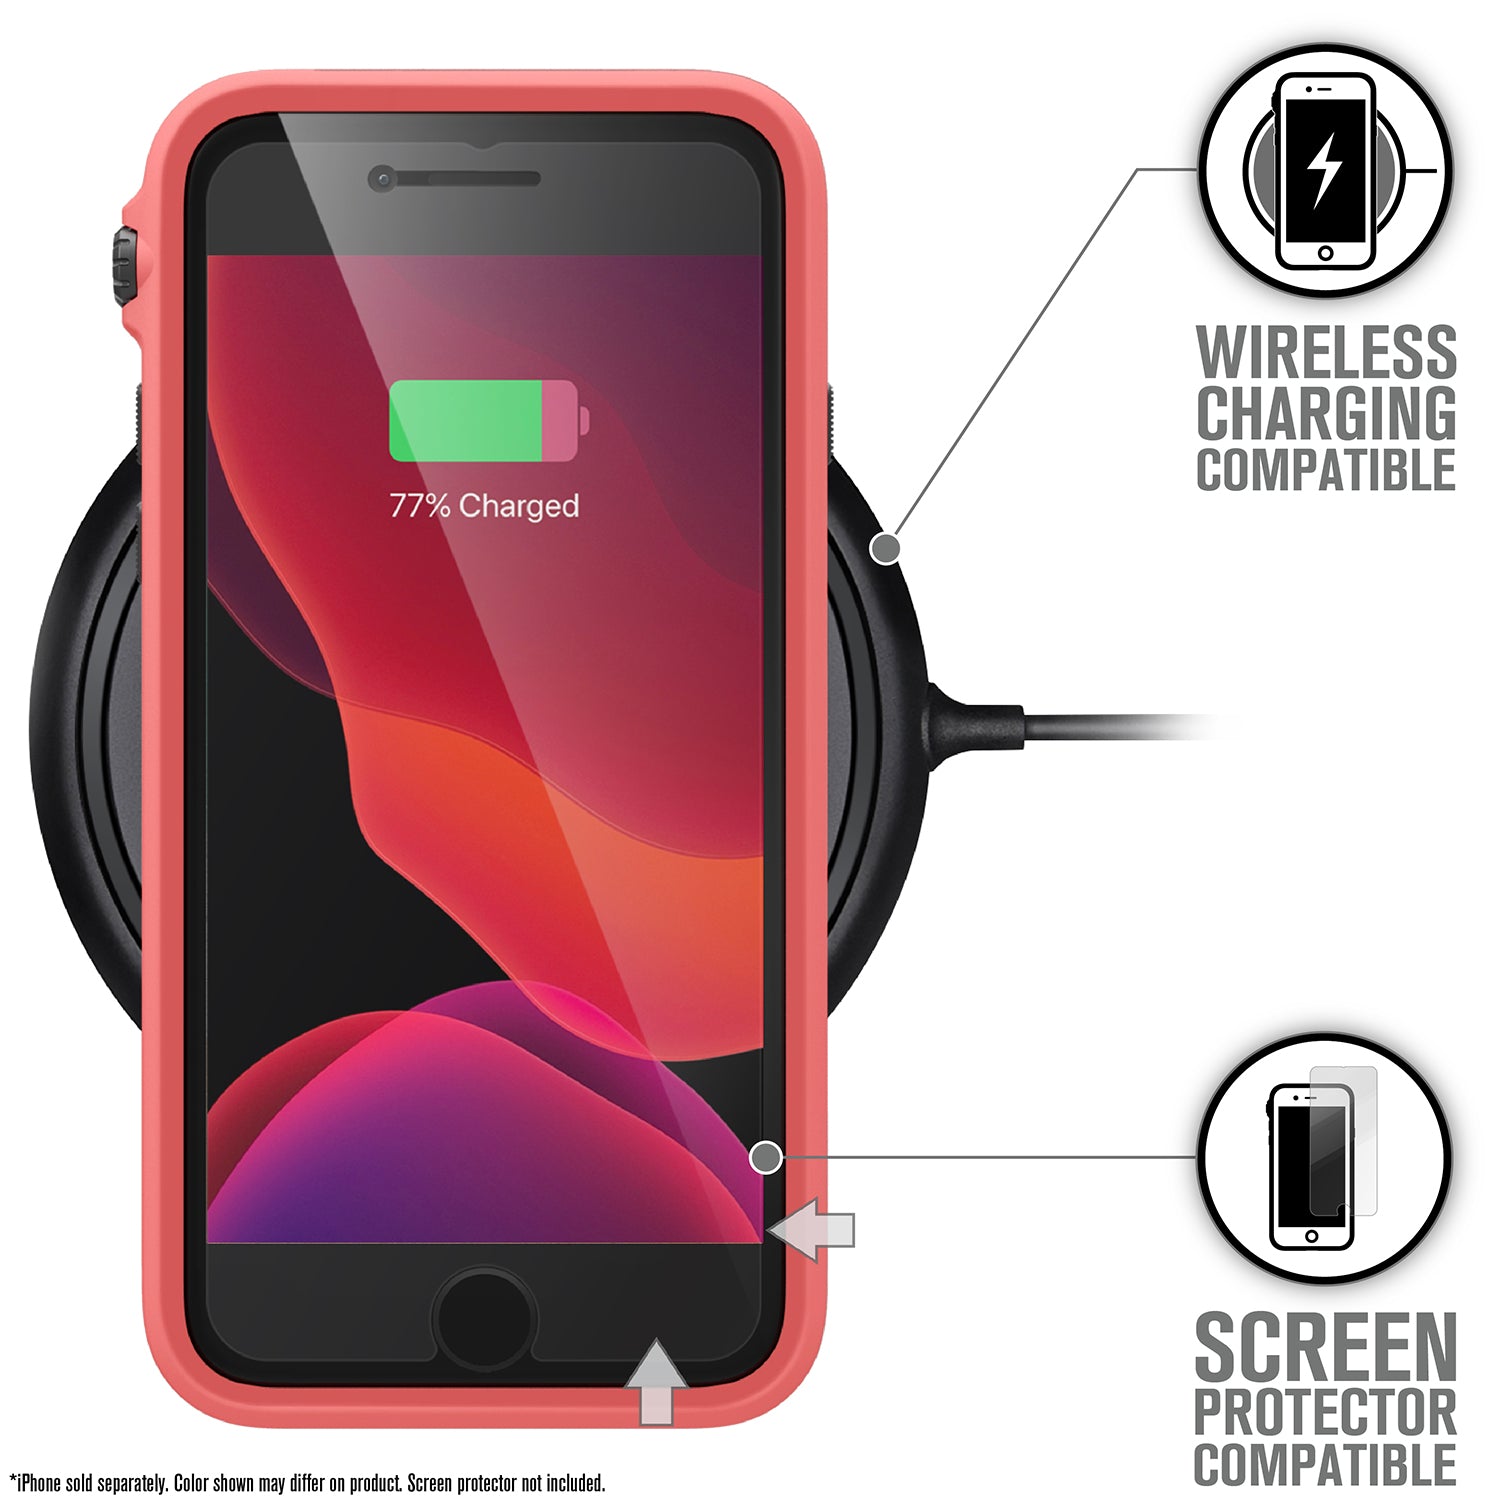 Catalyst iphone 8/7 impact protection case showing wireless charging in a coral colorway text reads wireless charging compatible screen protector compatible